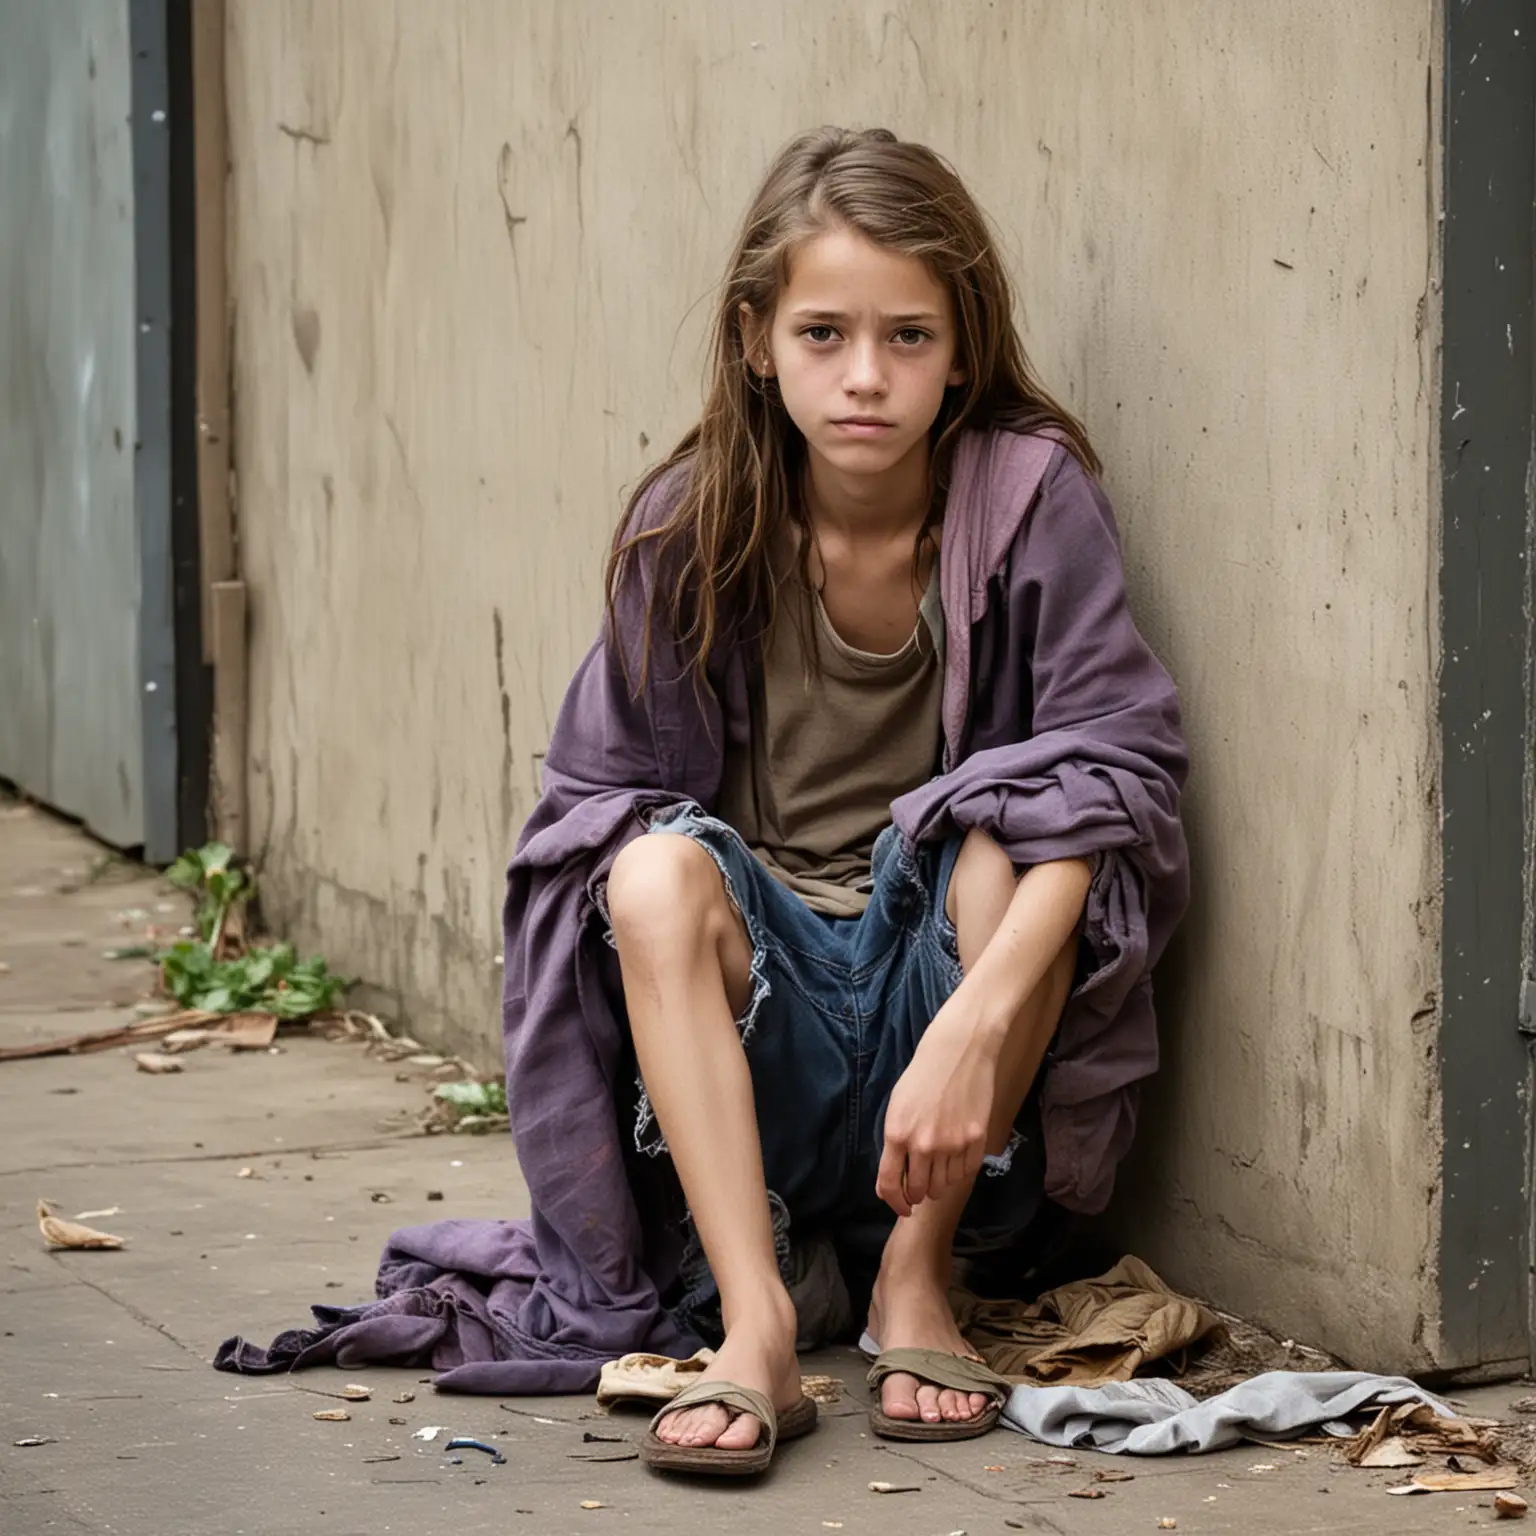 Vulnerable-Youth-Portrait-of-a-Skinny-Homeless-Preteen-Girl